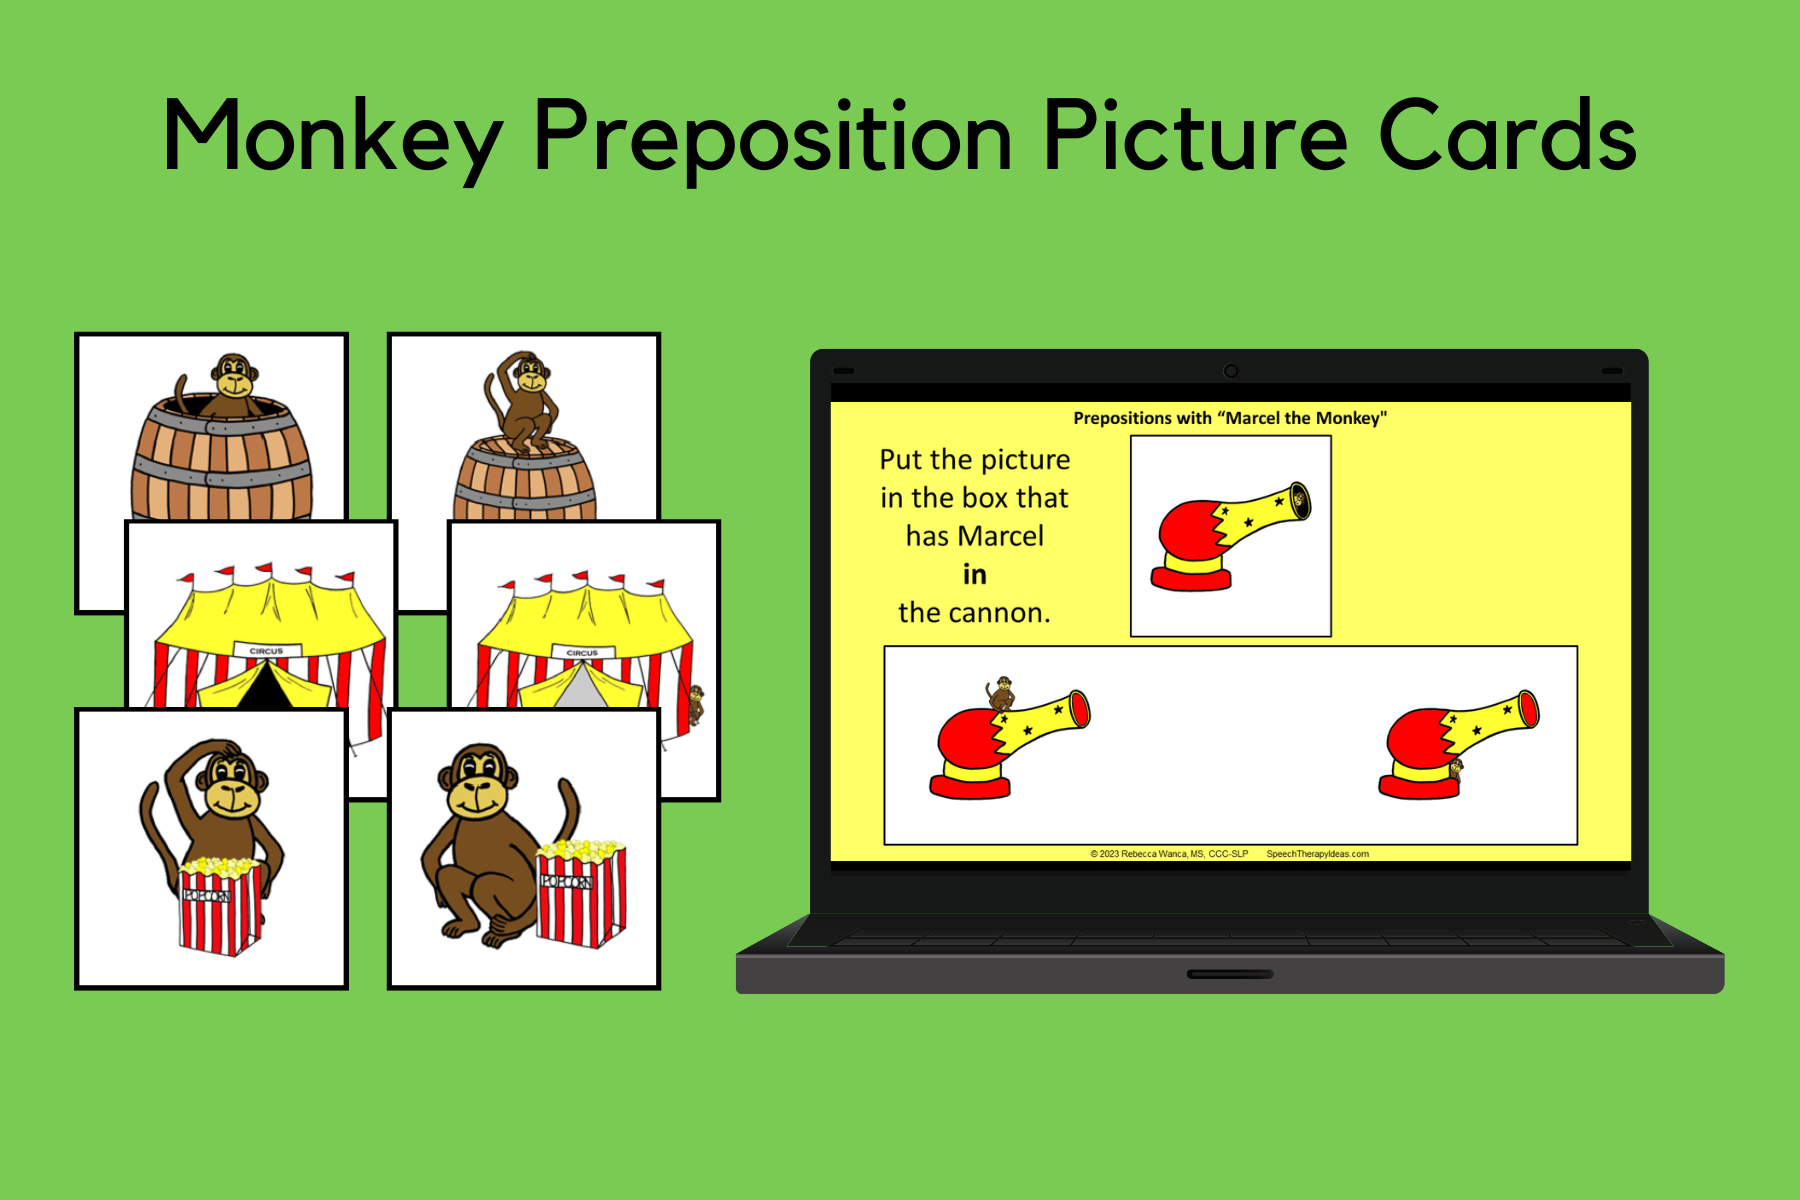 Monkey Preposition Picture Cards